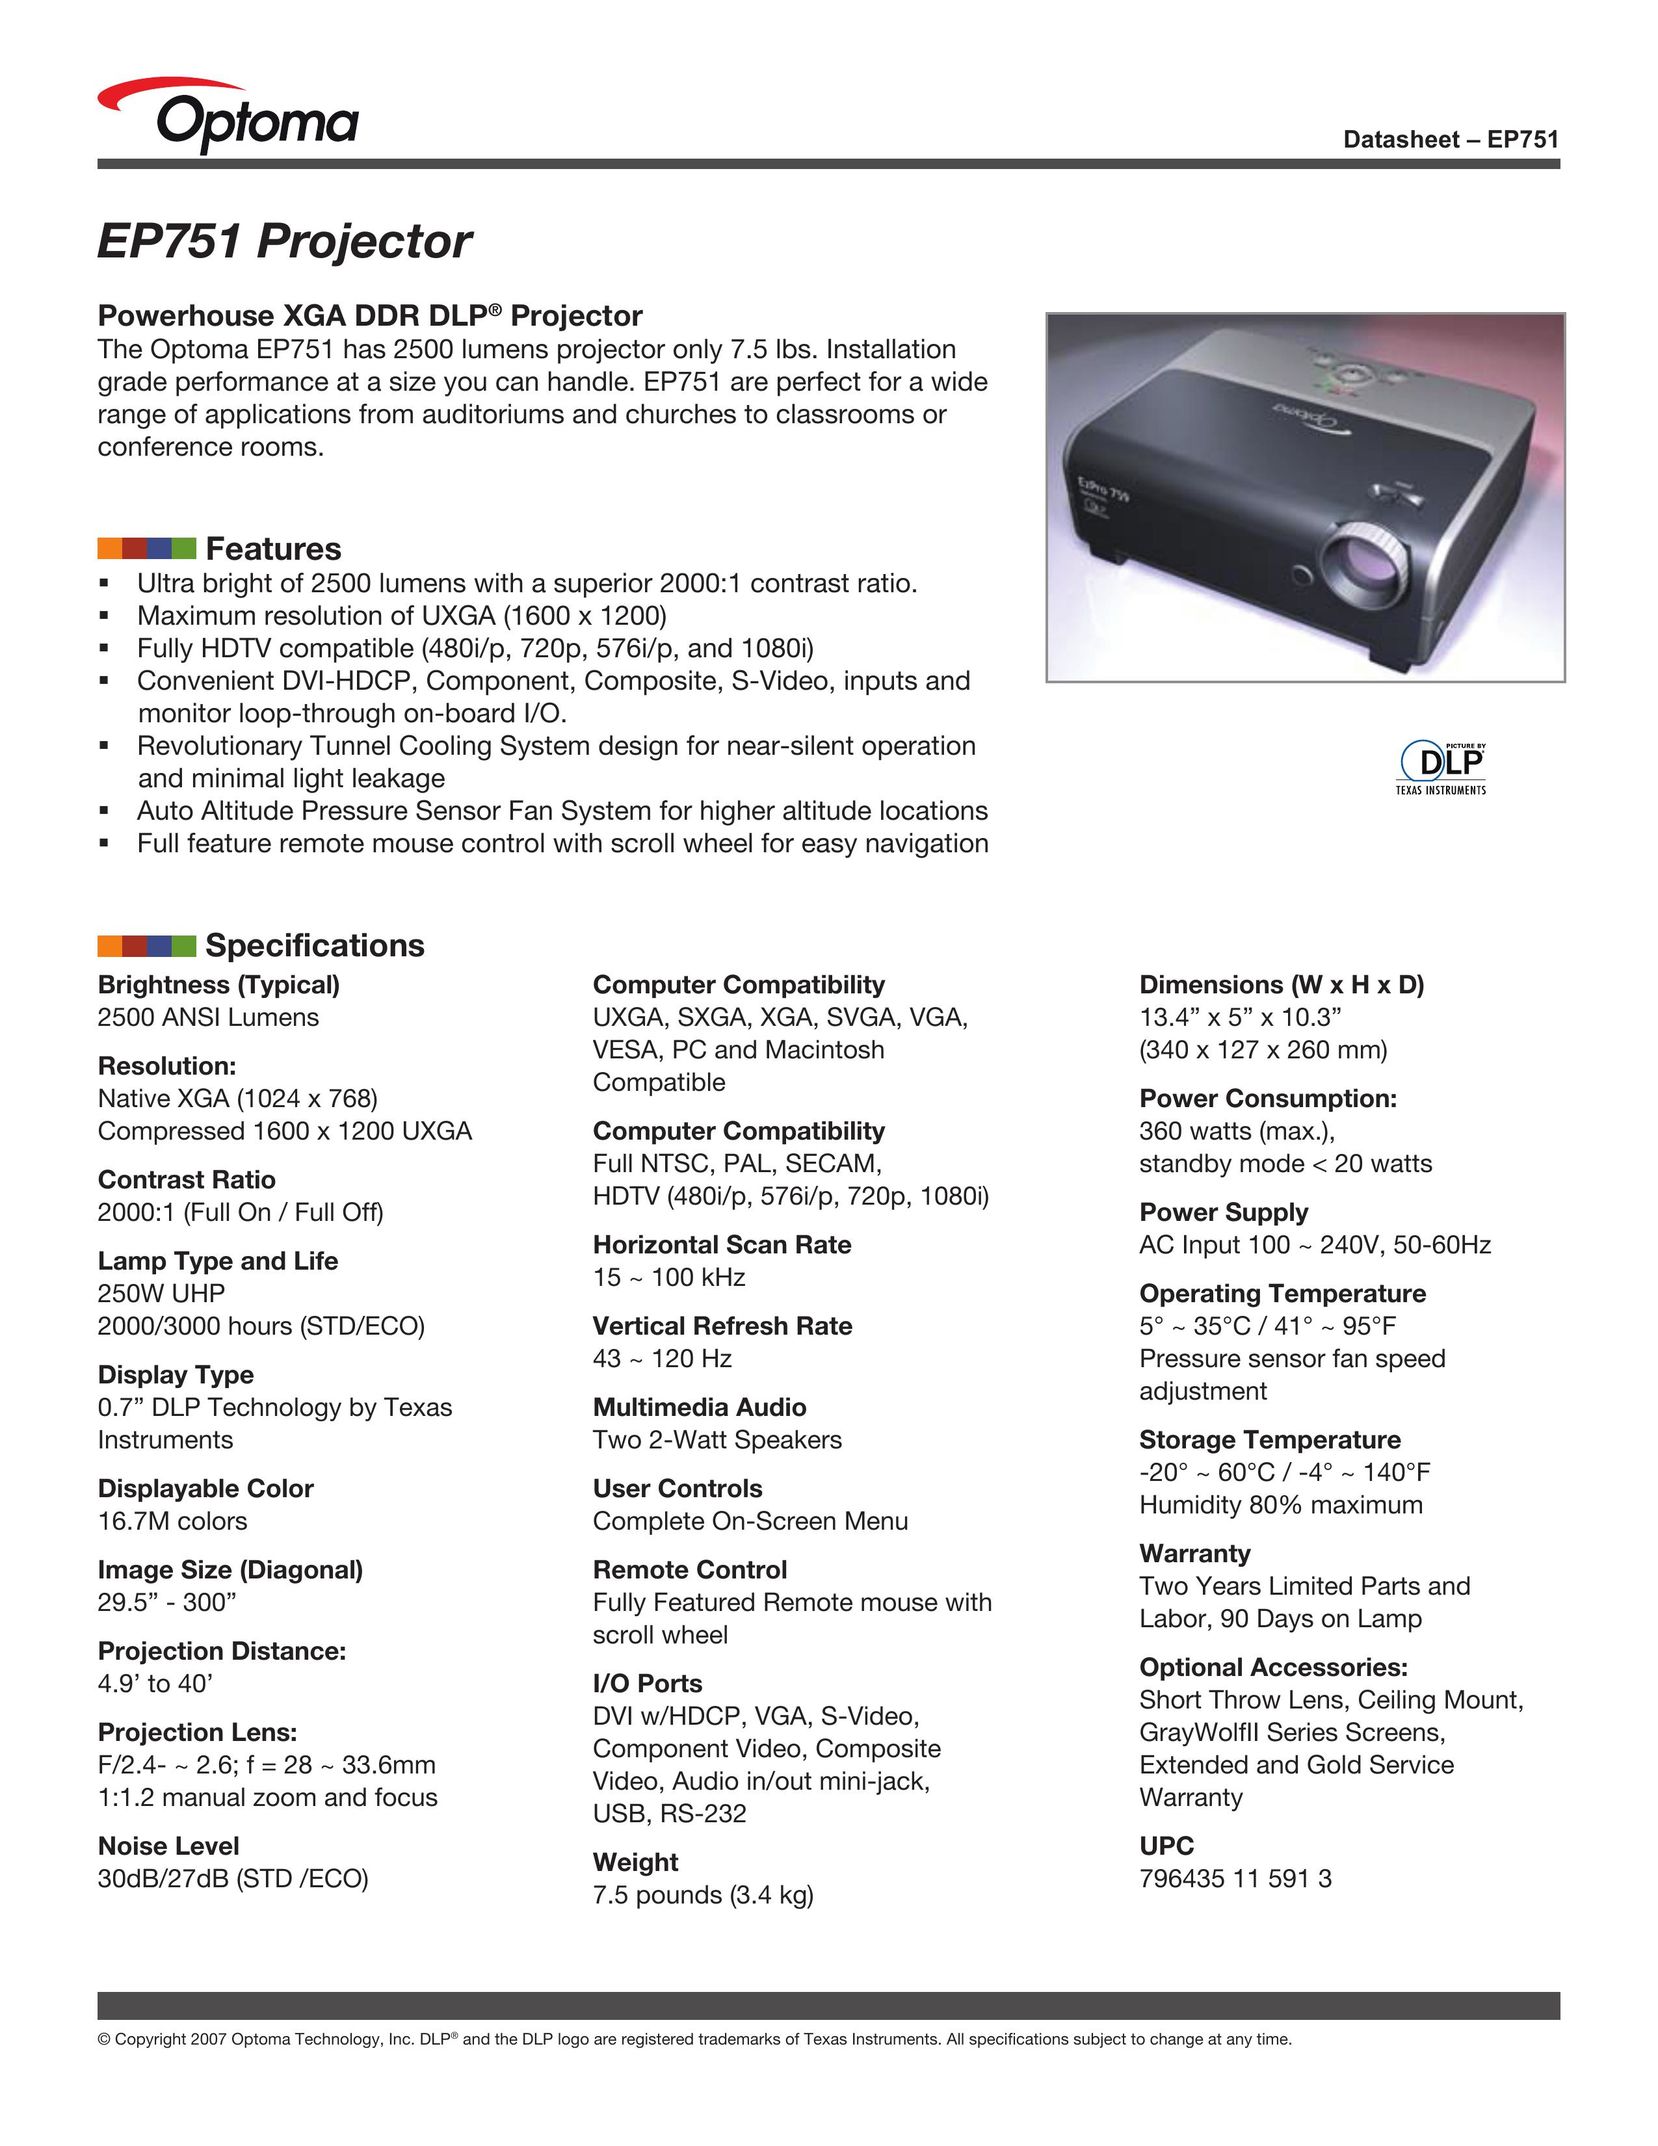 Optoma Technology EP751 Projector User Manual